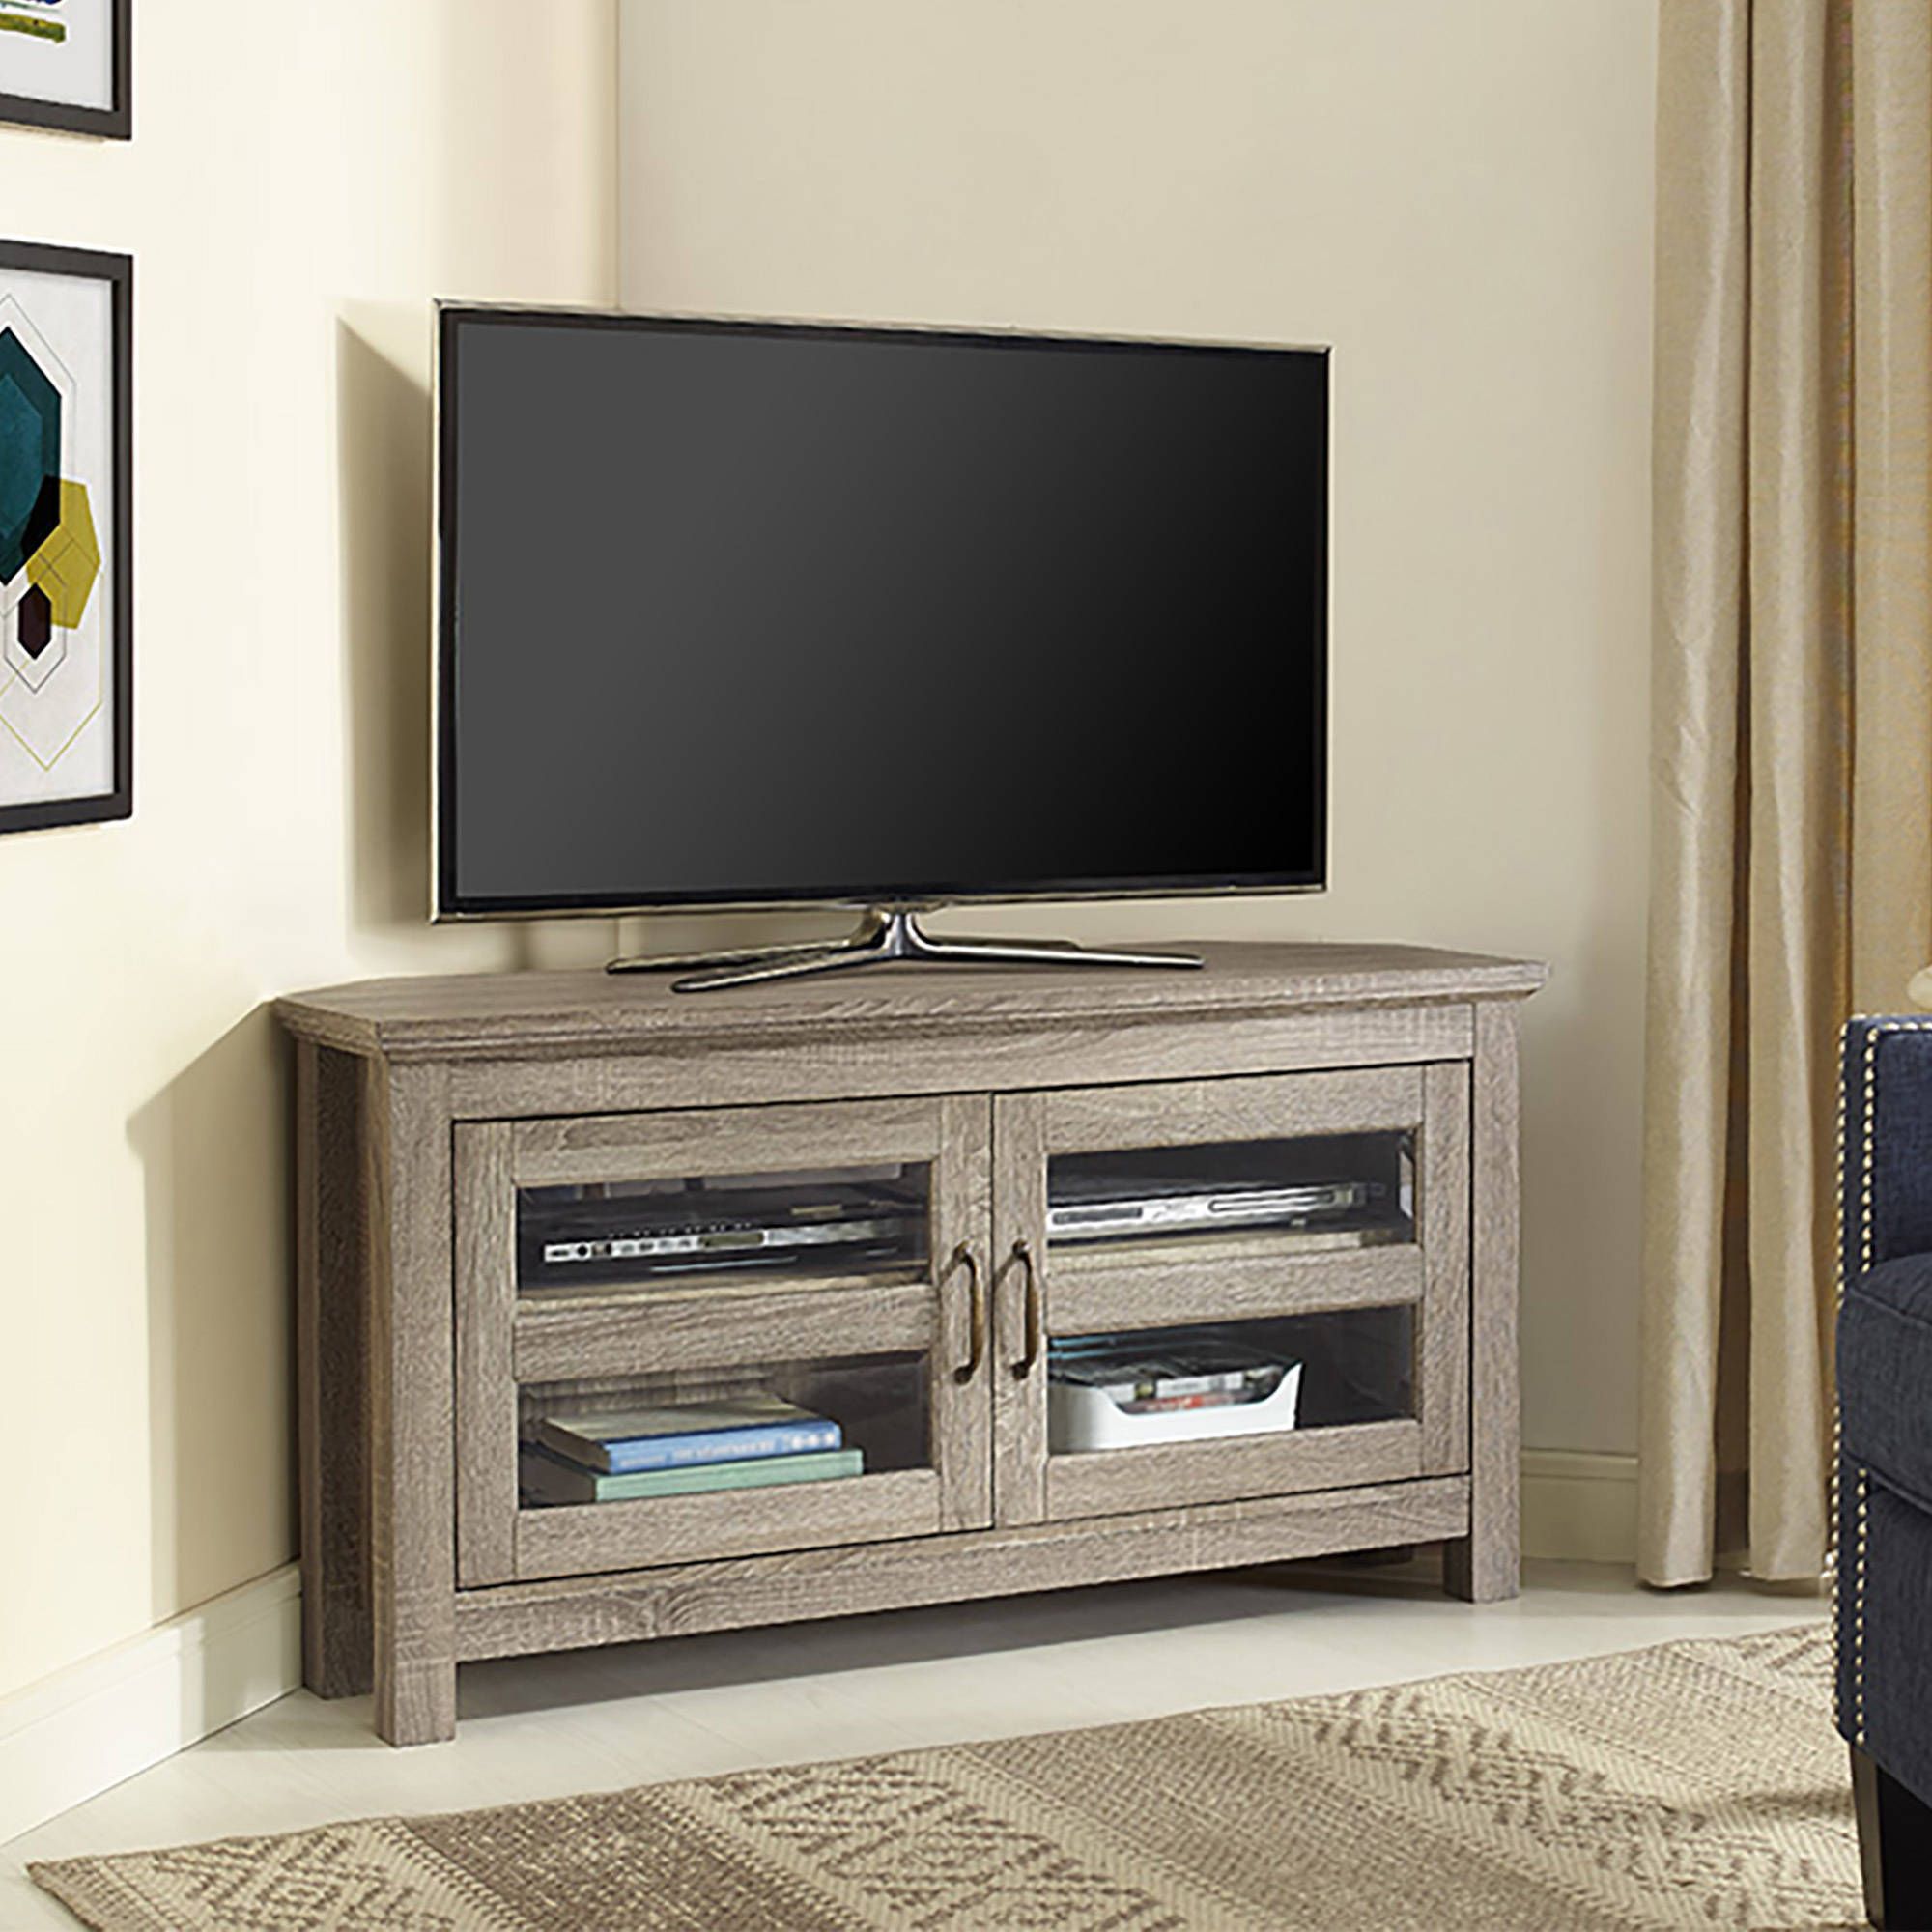 Corner Tv Stands With Regard To Preferred Walker Edison Black Corner Tv Stand For Tvs Up To 48", Multiple (View 10 of 20)